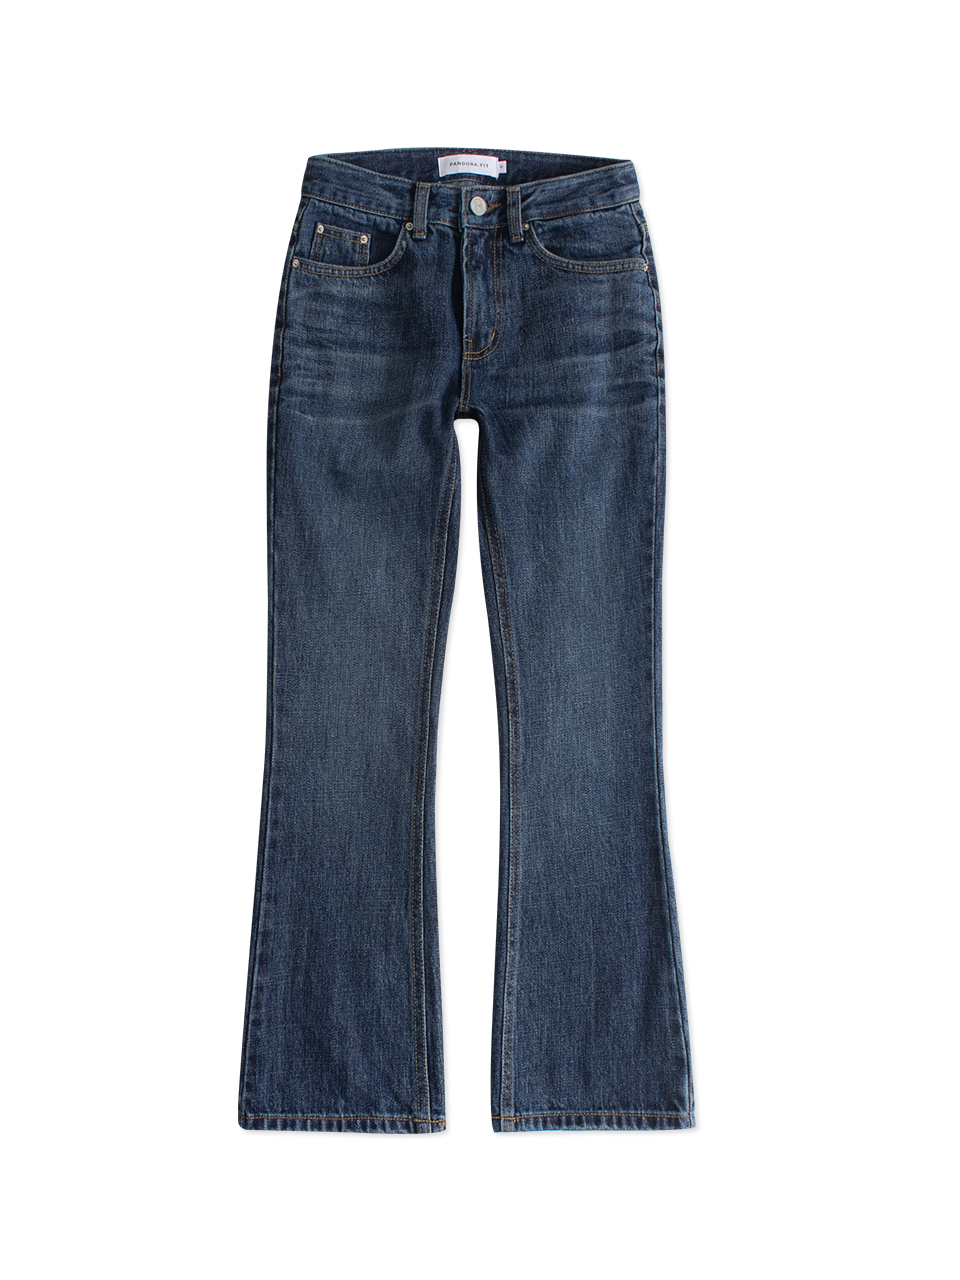 [BOOTSCUT] Row Crop Jeans